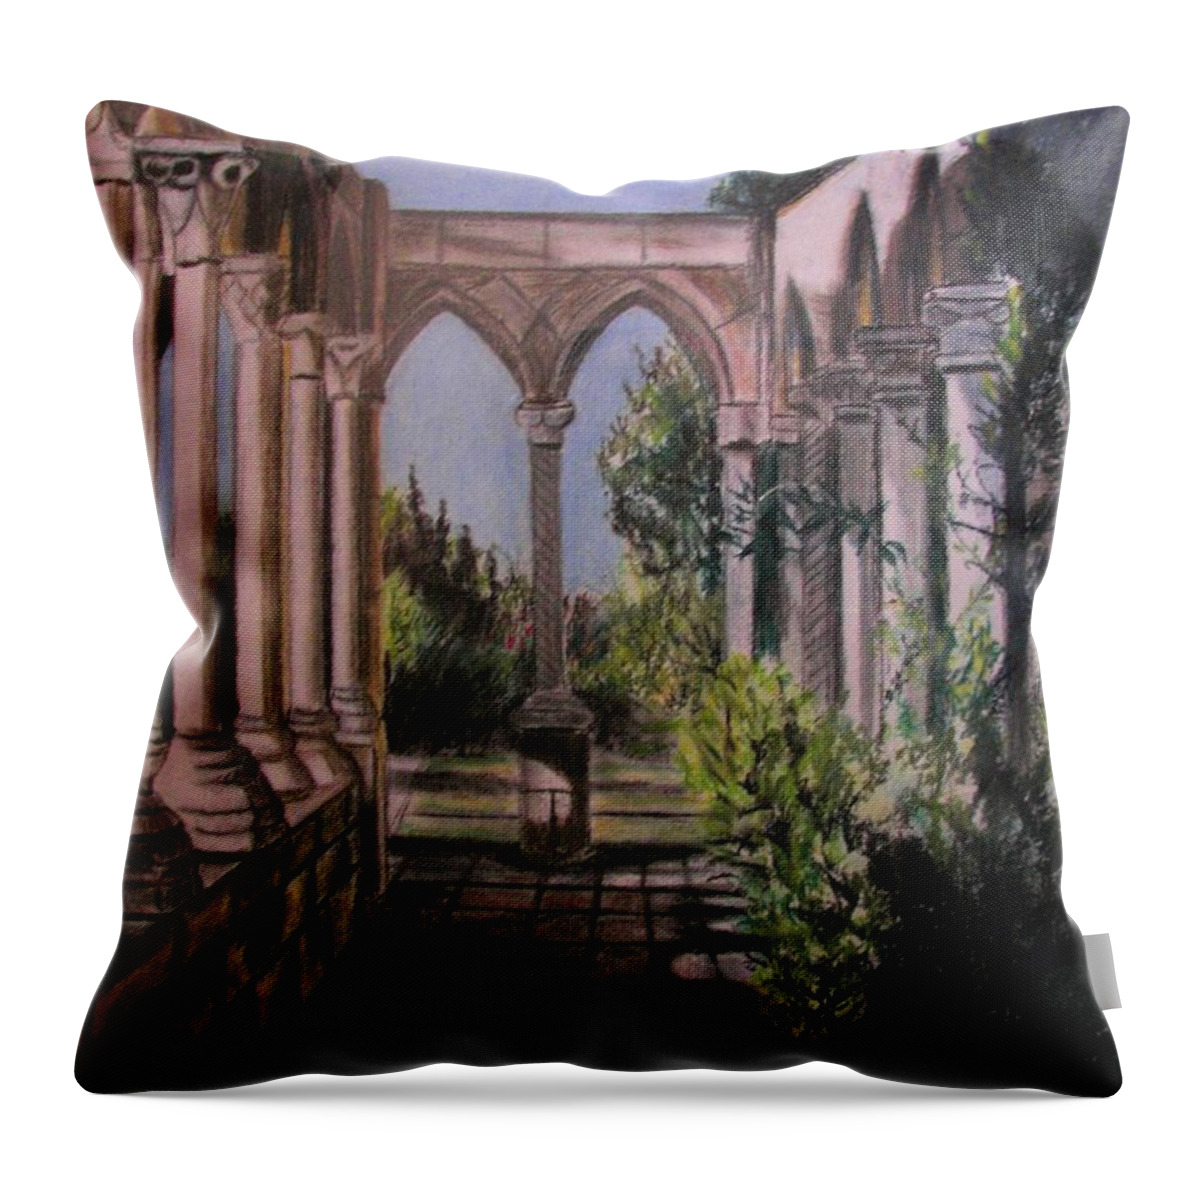 Cloister Throw Pillow featuring the painting The Cloisters Colonade by Judy Via-Wolff